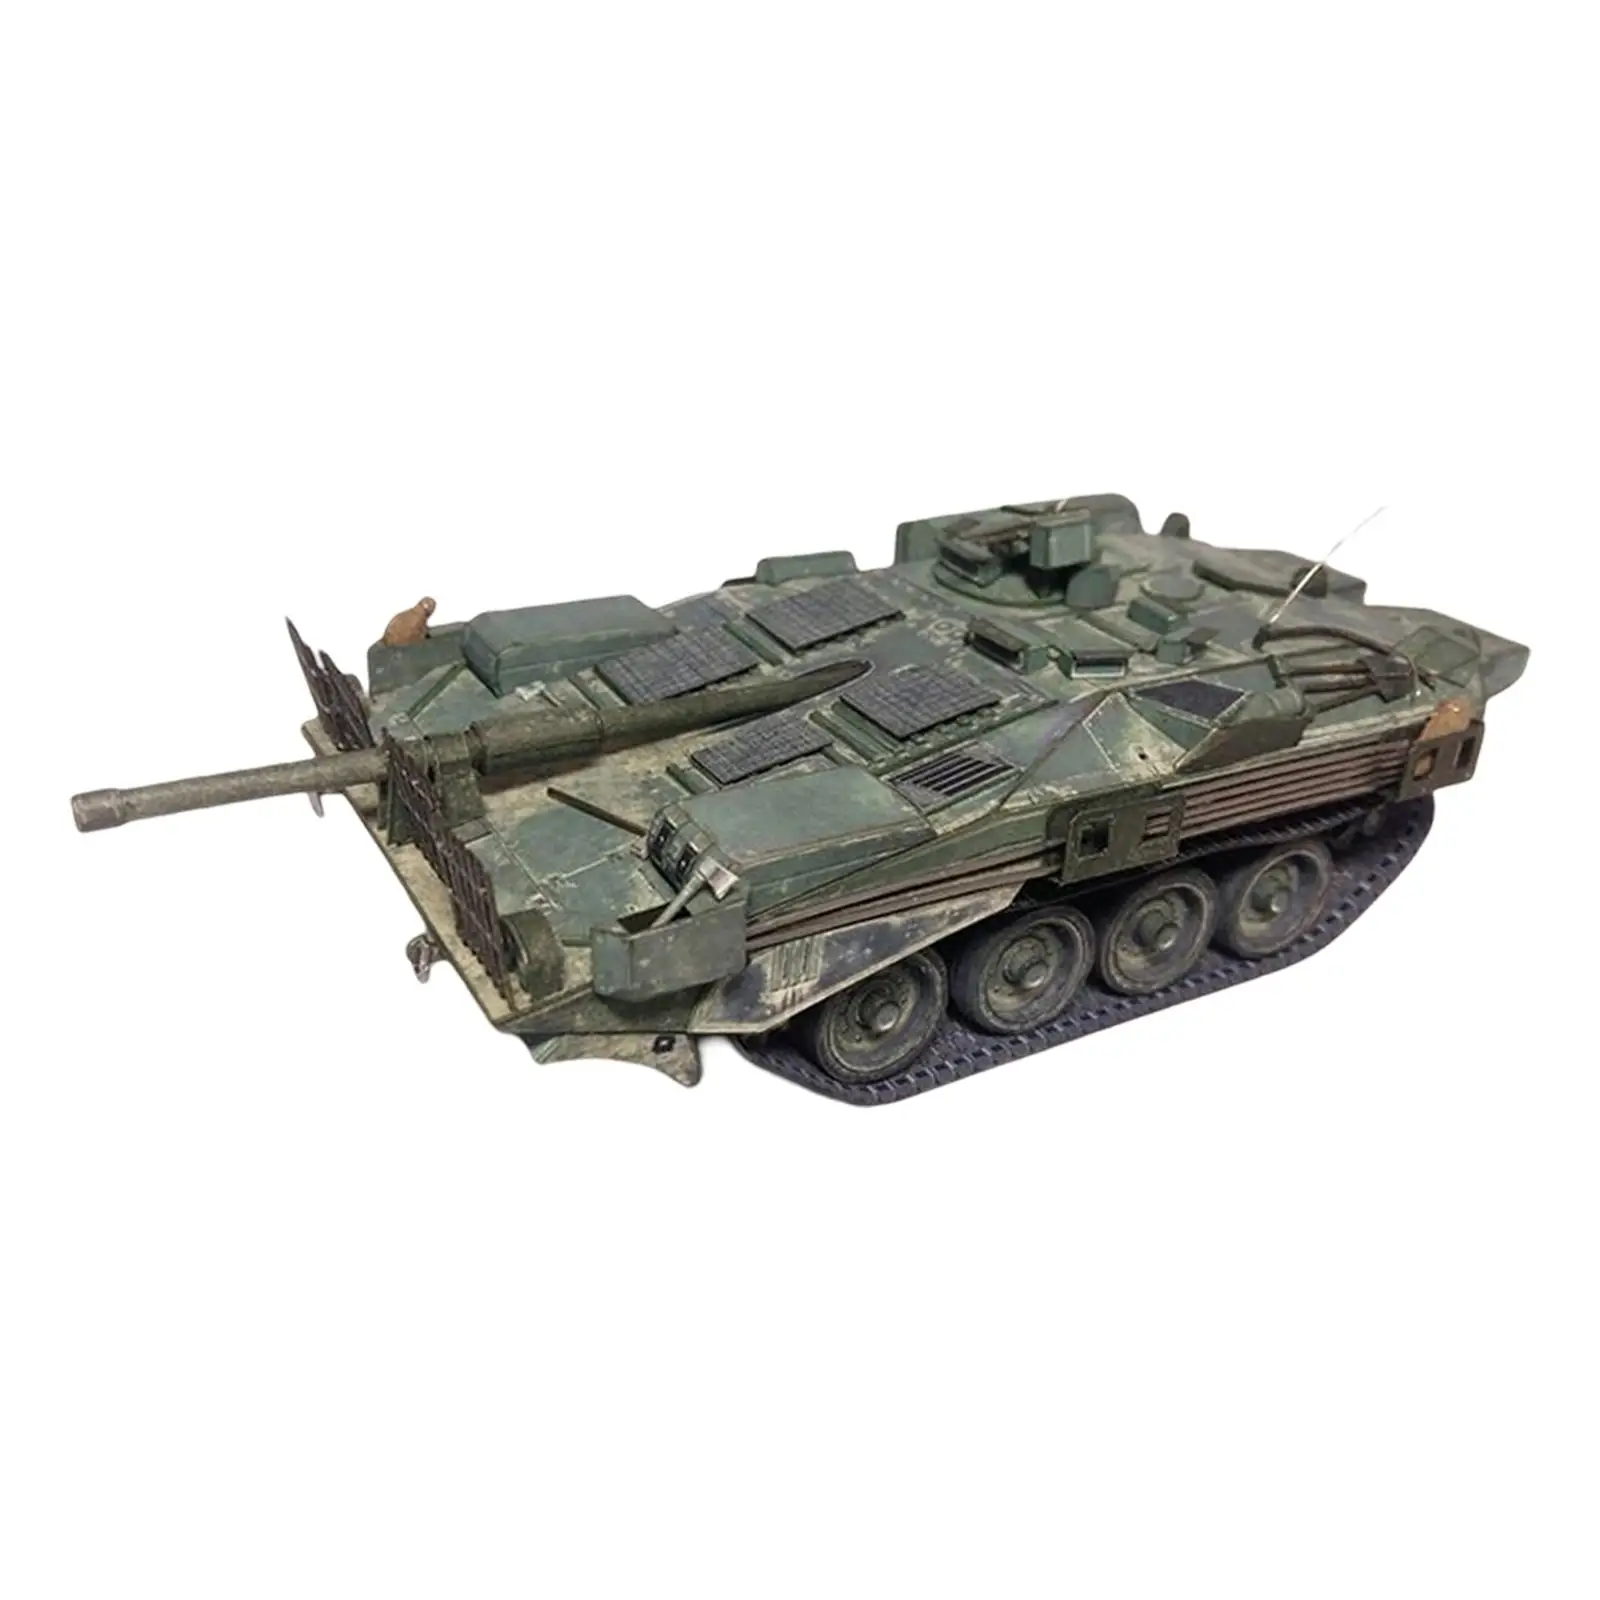 1:35 Tank Model Educational Toys Decor DIY Assemble Toy for Children Gifts